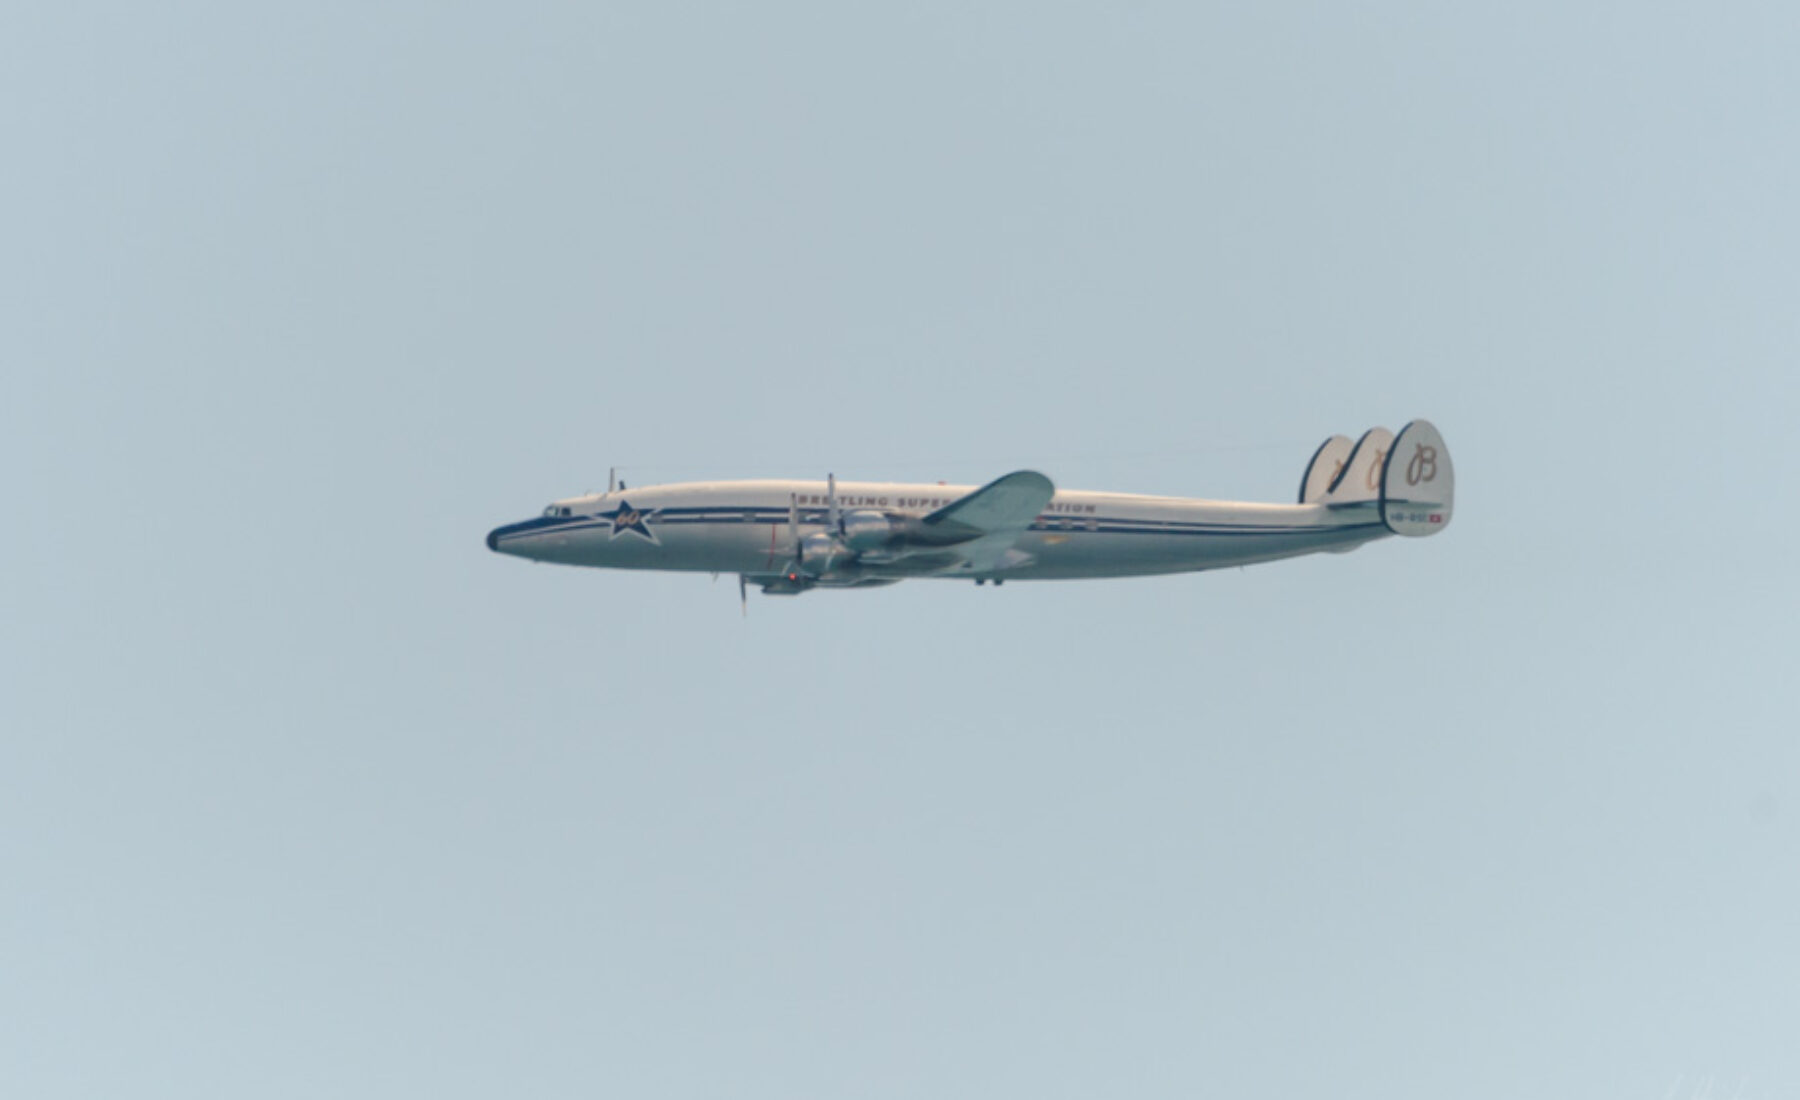 2015-09-08 DC-3 and Super Constellation